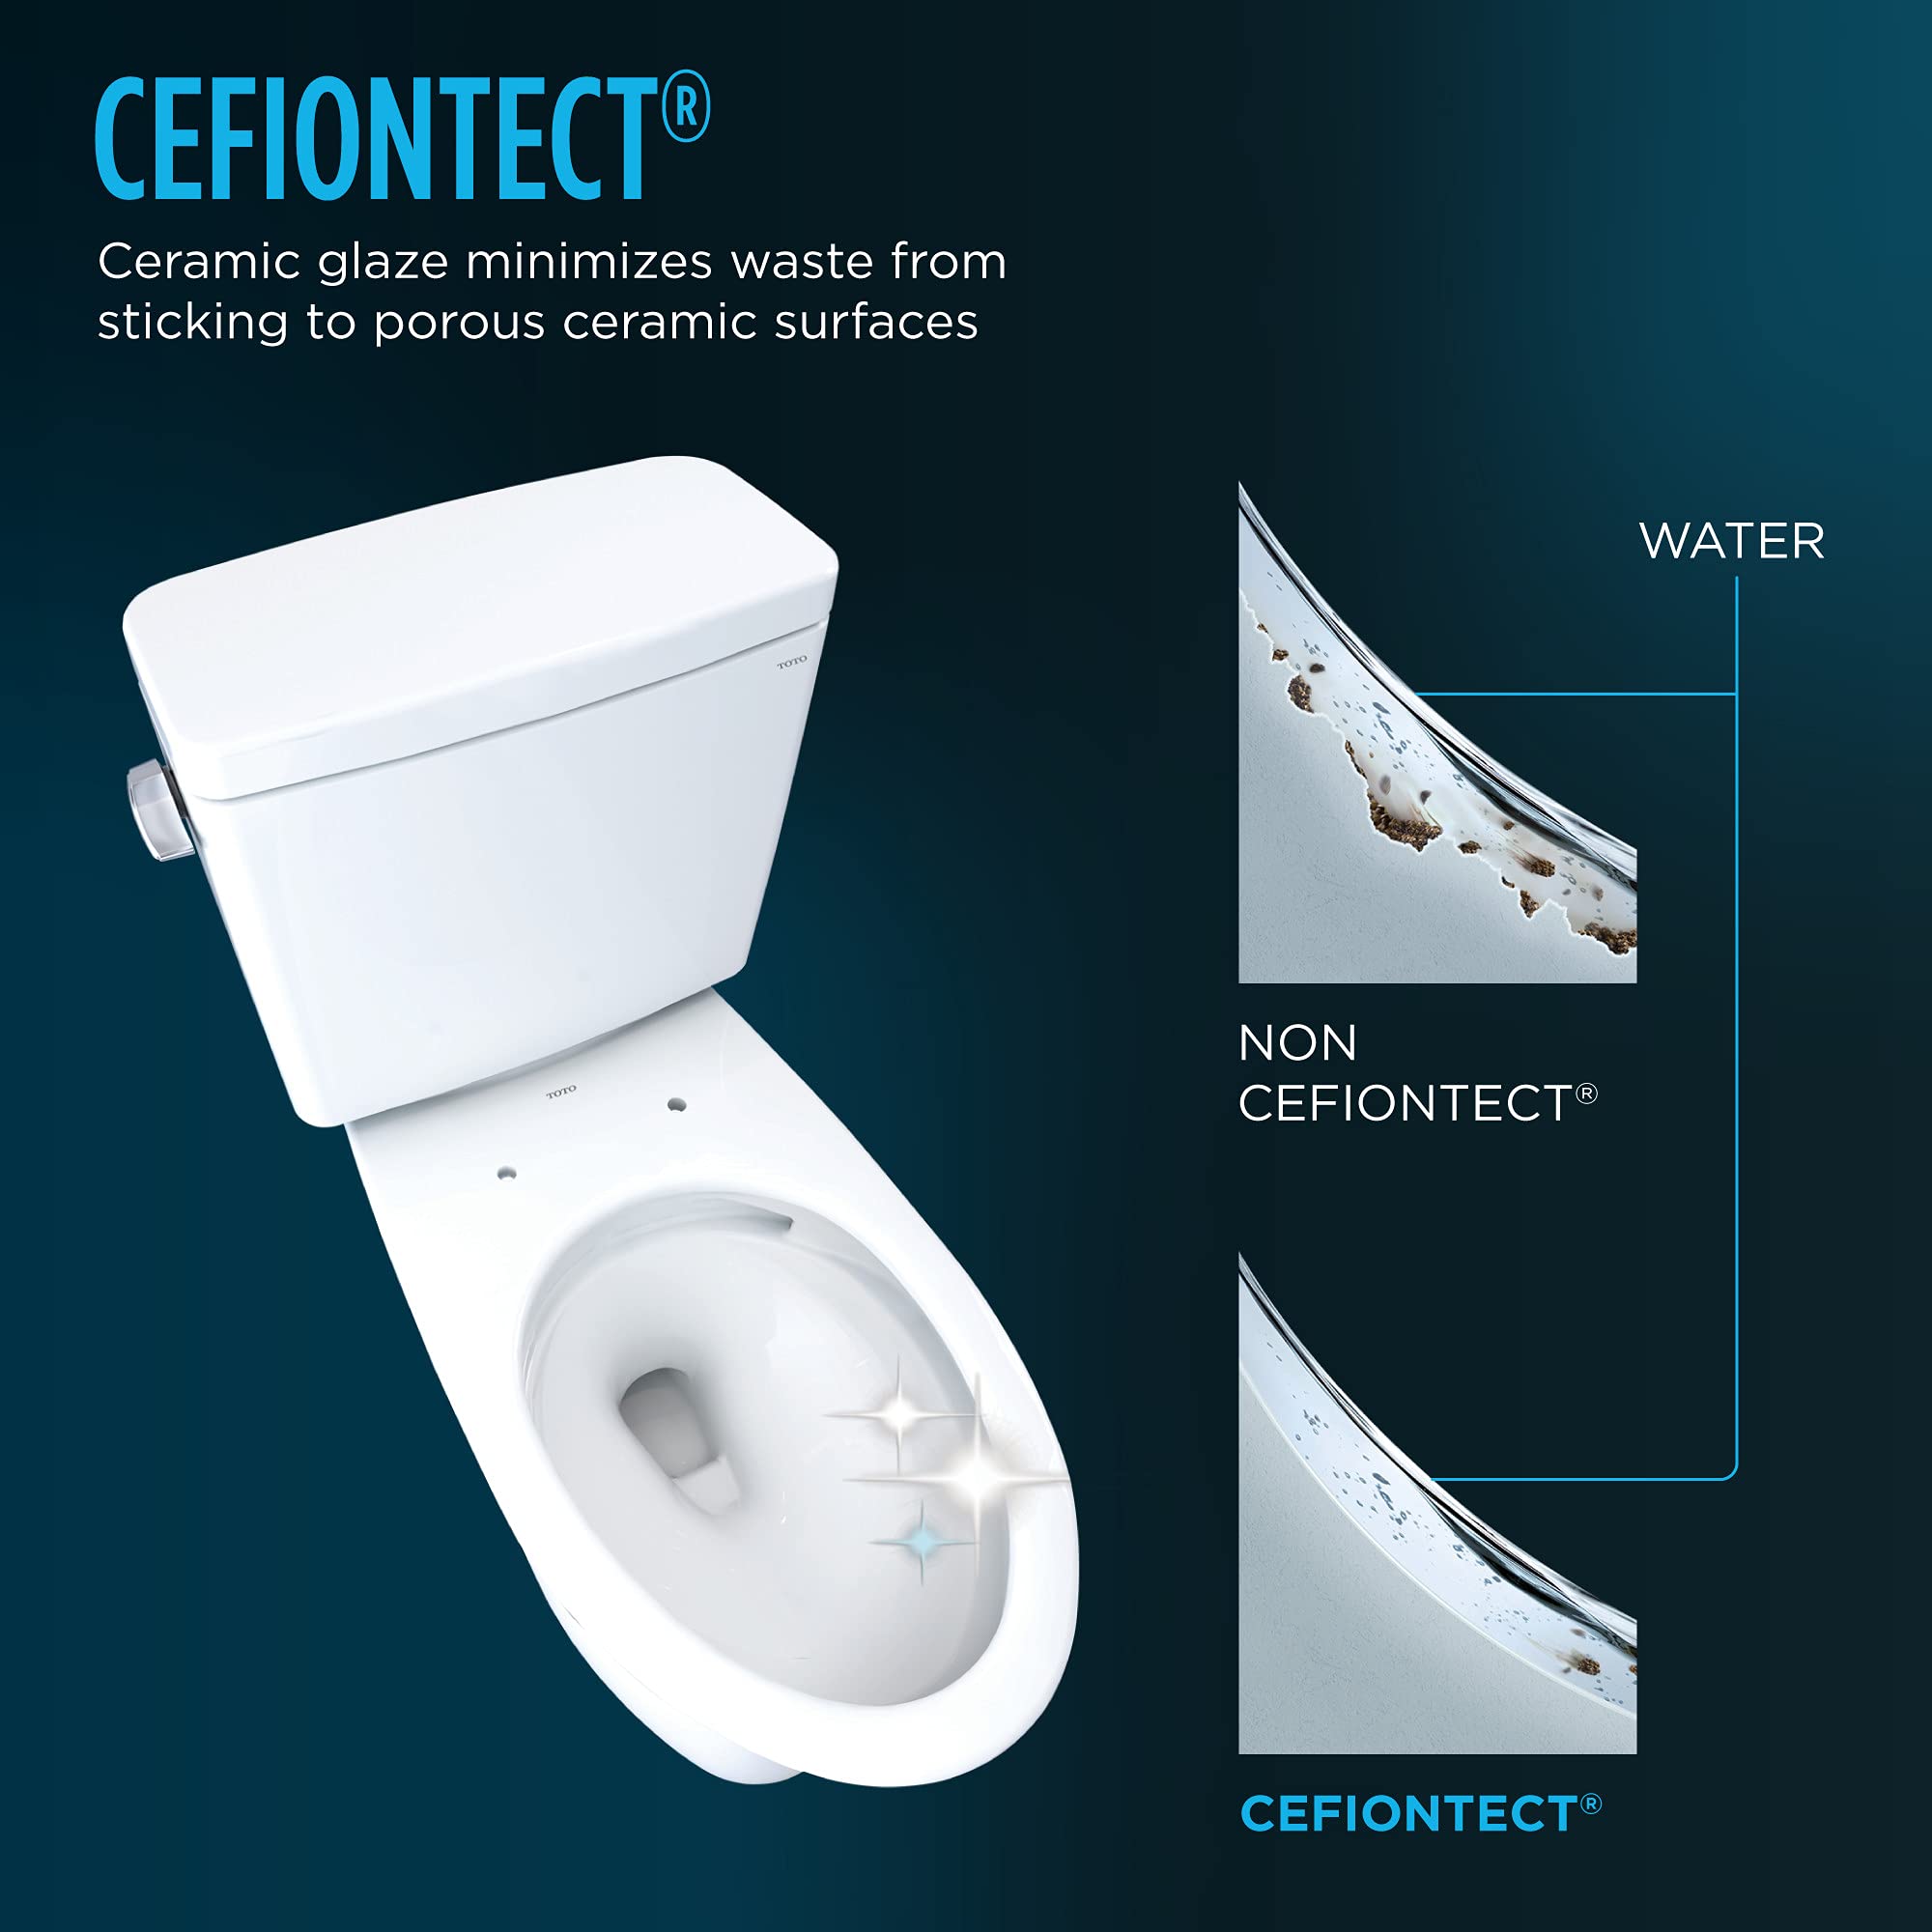 TOTO Drake Two-Piece Elongated 1.6 GPF TORNADO FLUSH Toilet with CEFIONTECT and SoftClose Seat, WASHLET+ Ready, Cotton White - MS776124CSG#01